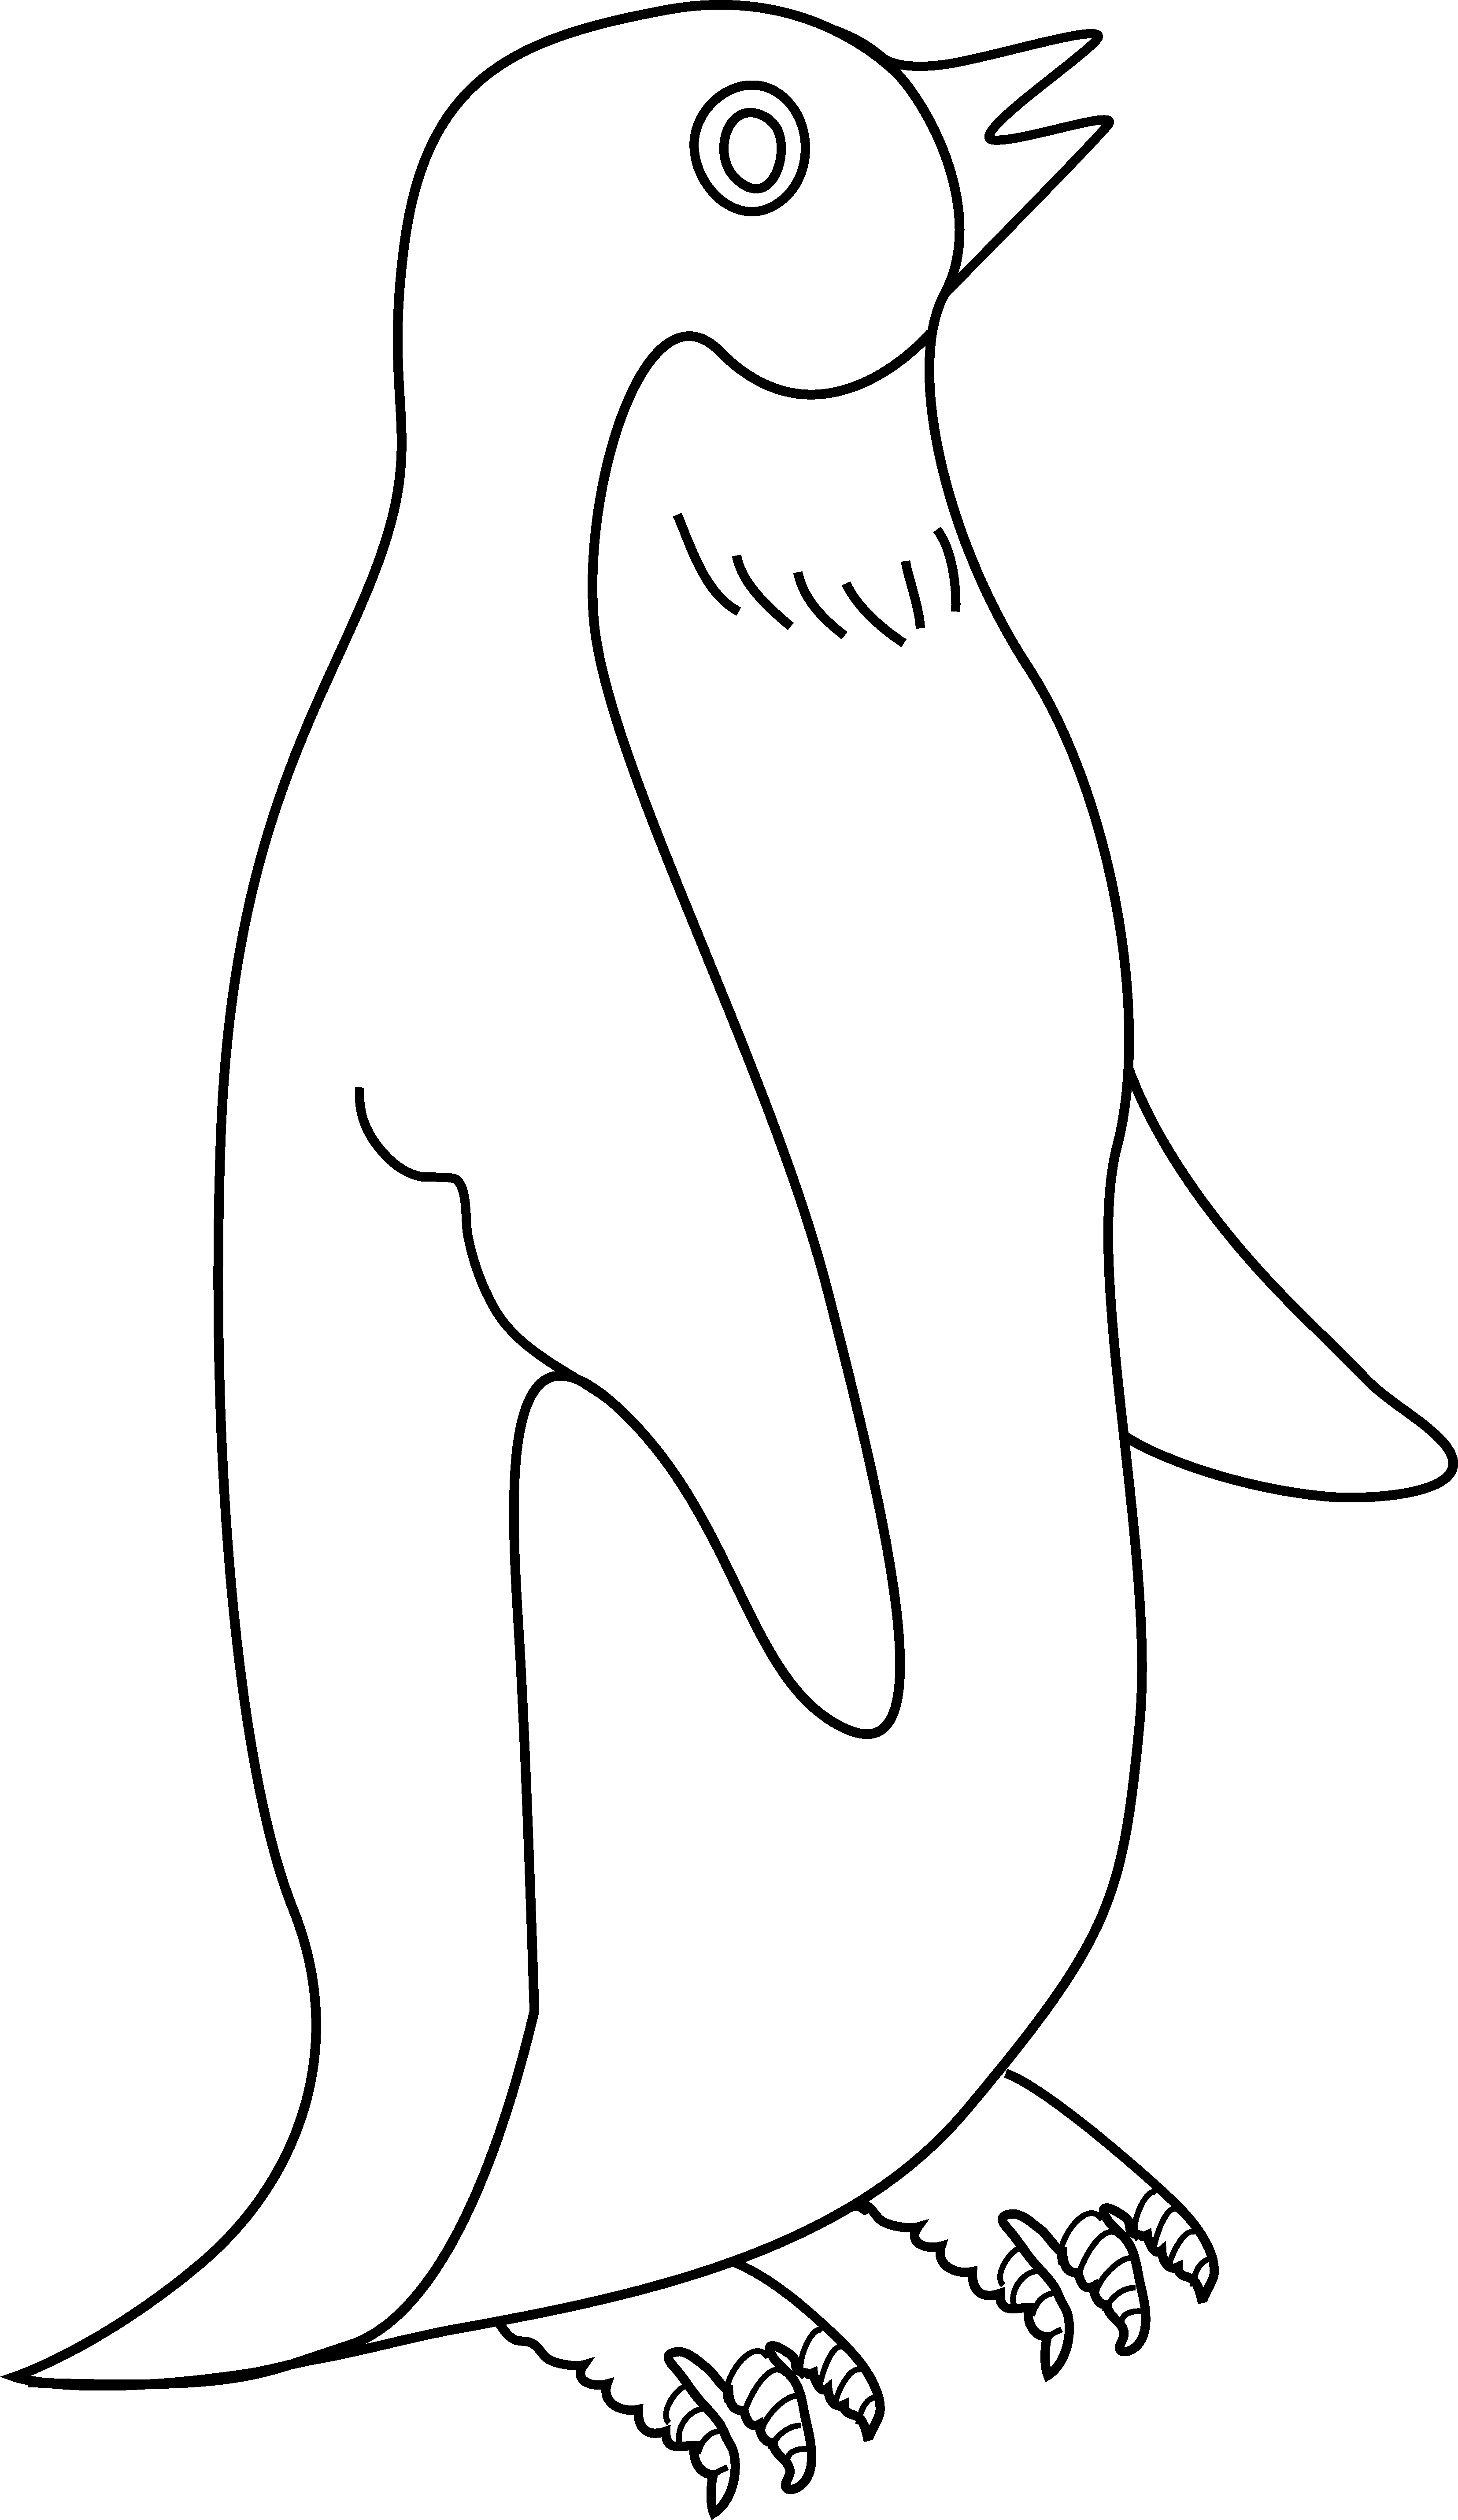 Penguin coloring page free. Clipart penquin 3 animal